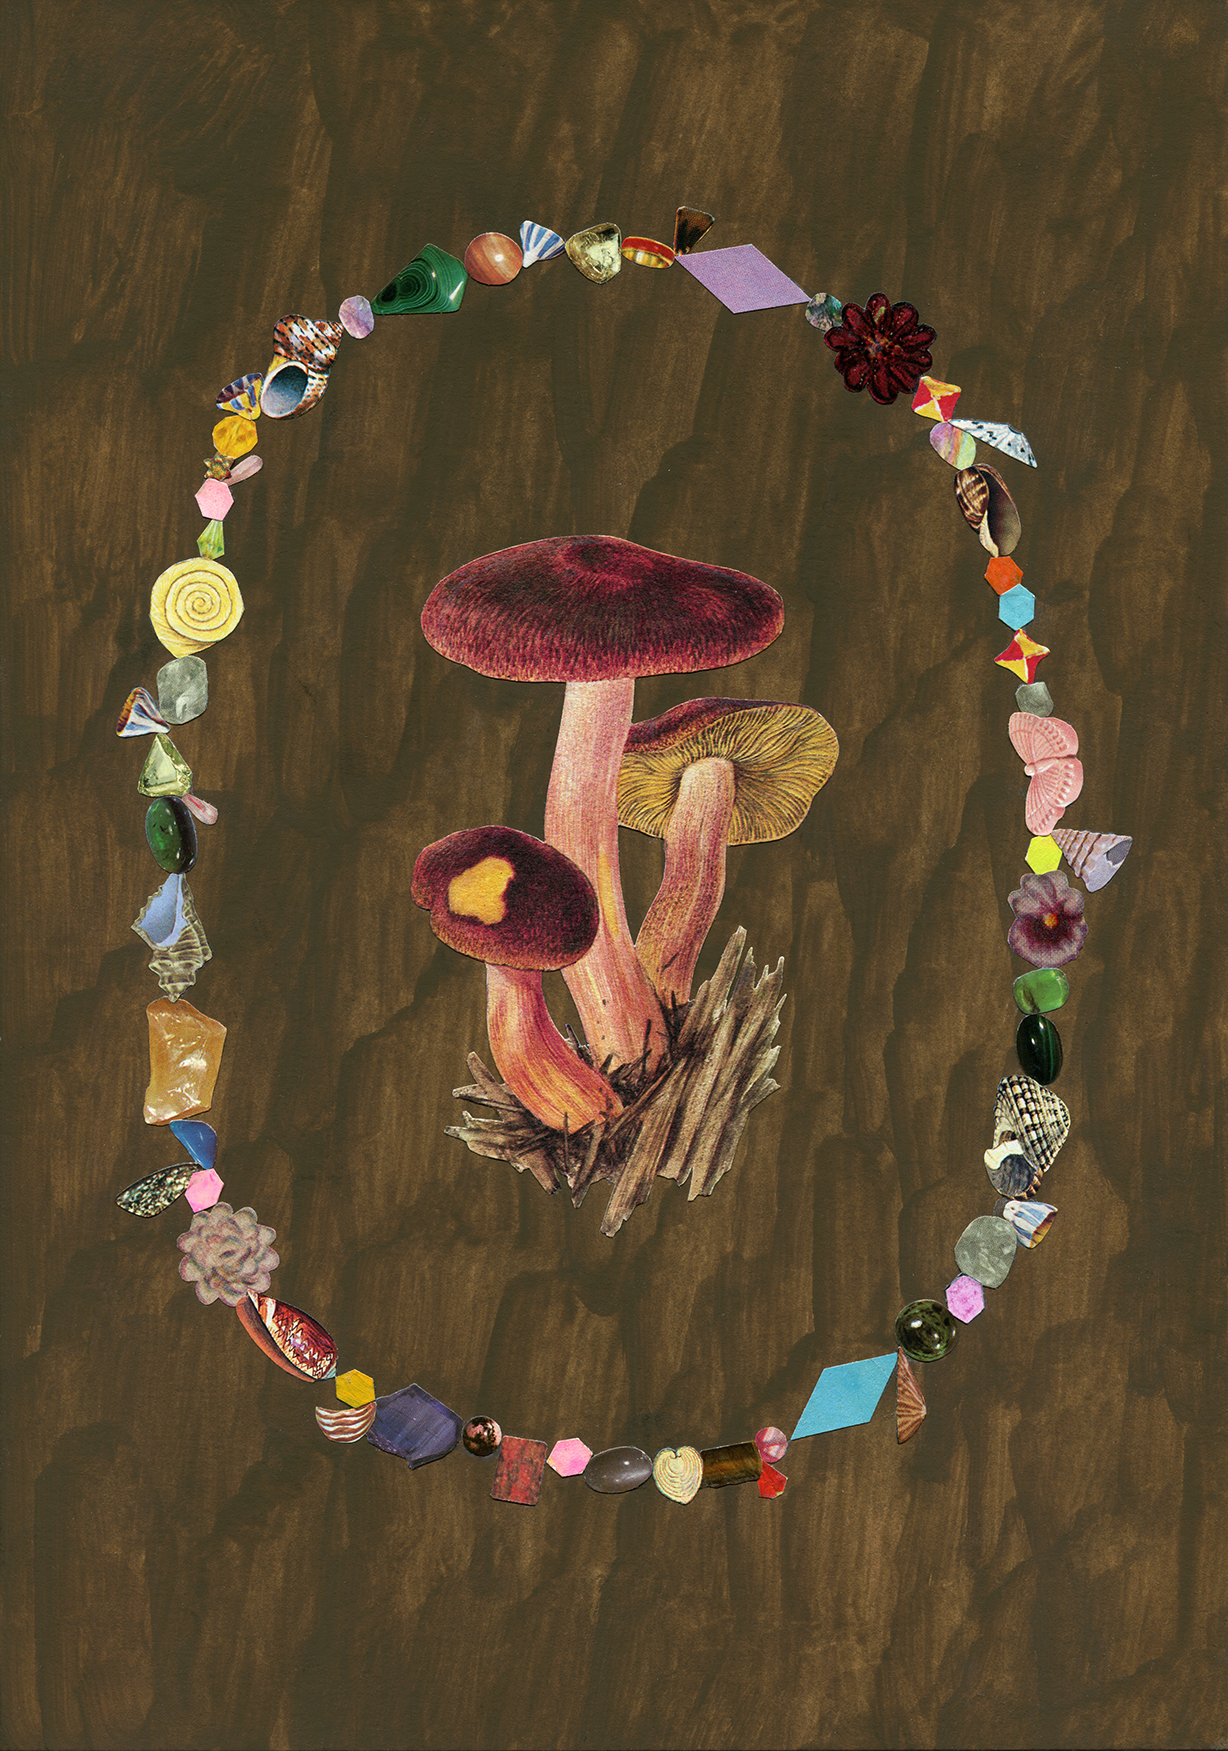 Mushrooms with Beaded Necklace # 3, 2020, collage, found paper, acrylic gouache, 210mm x 297mm